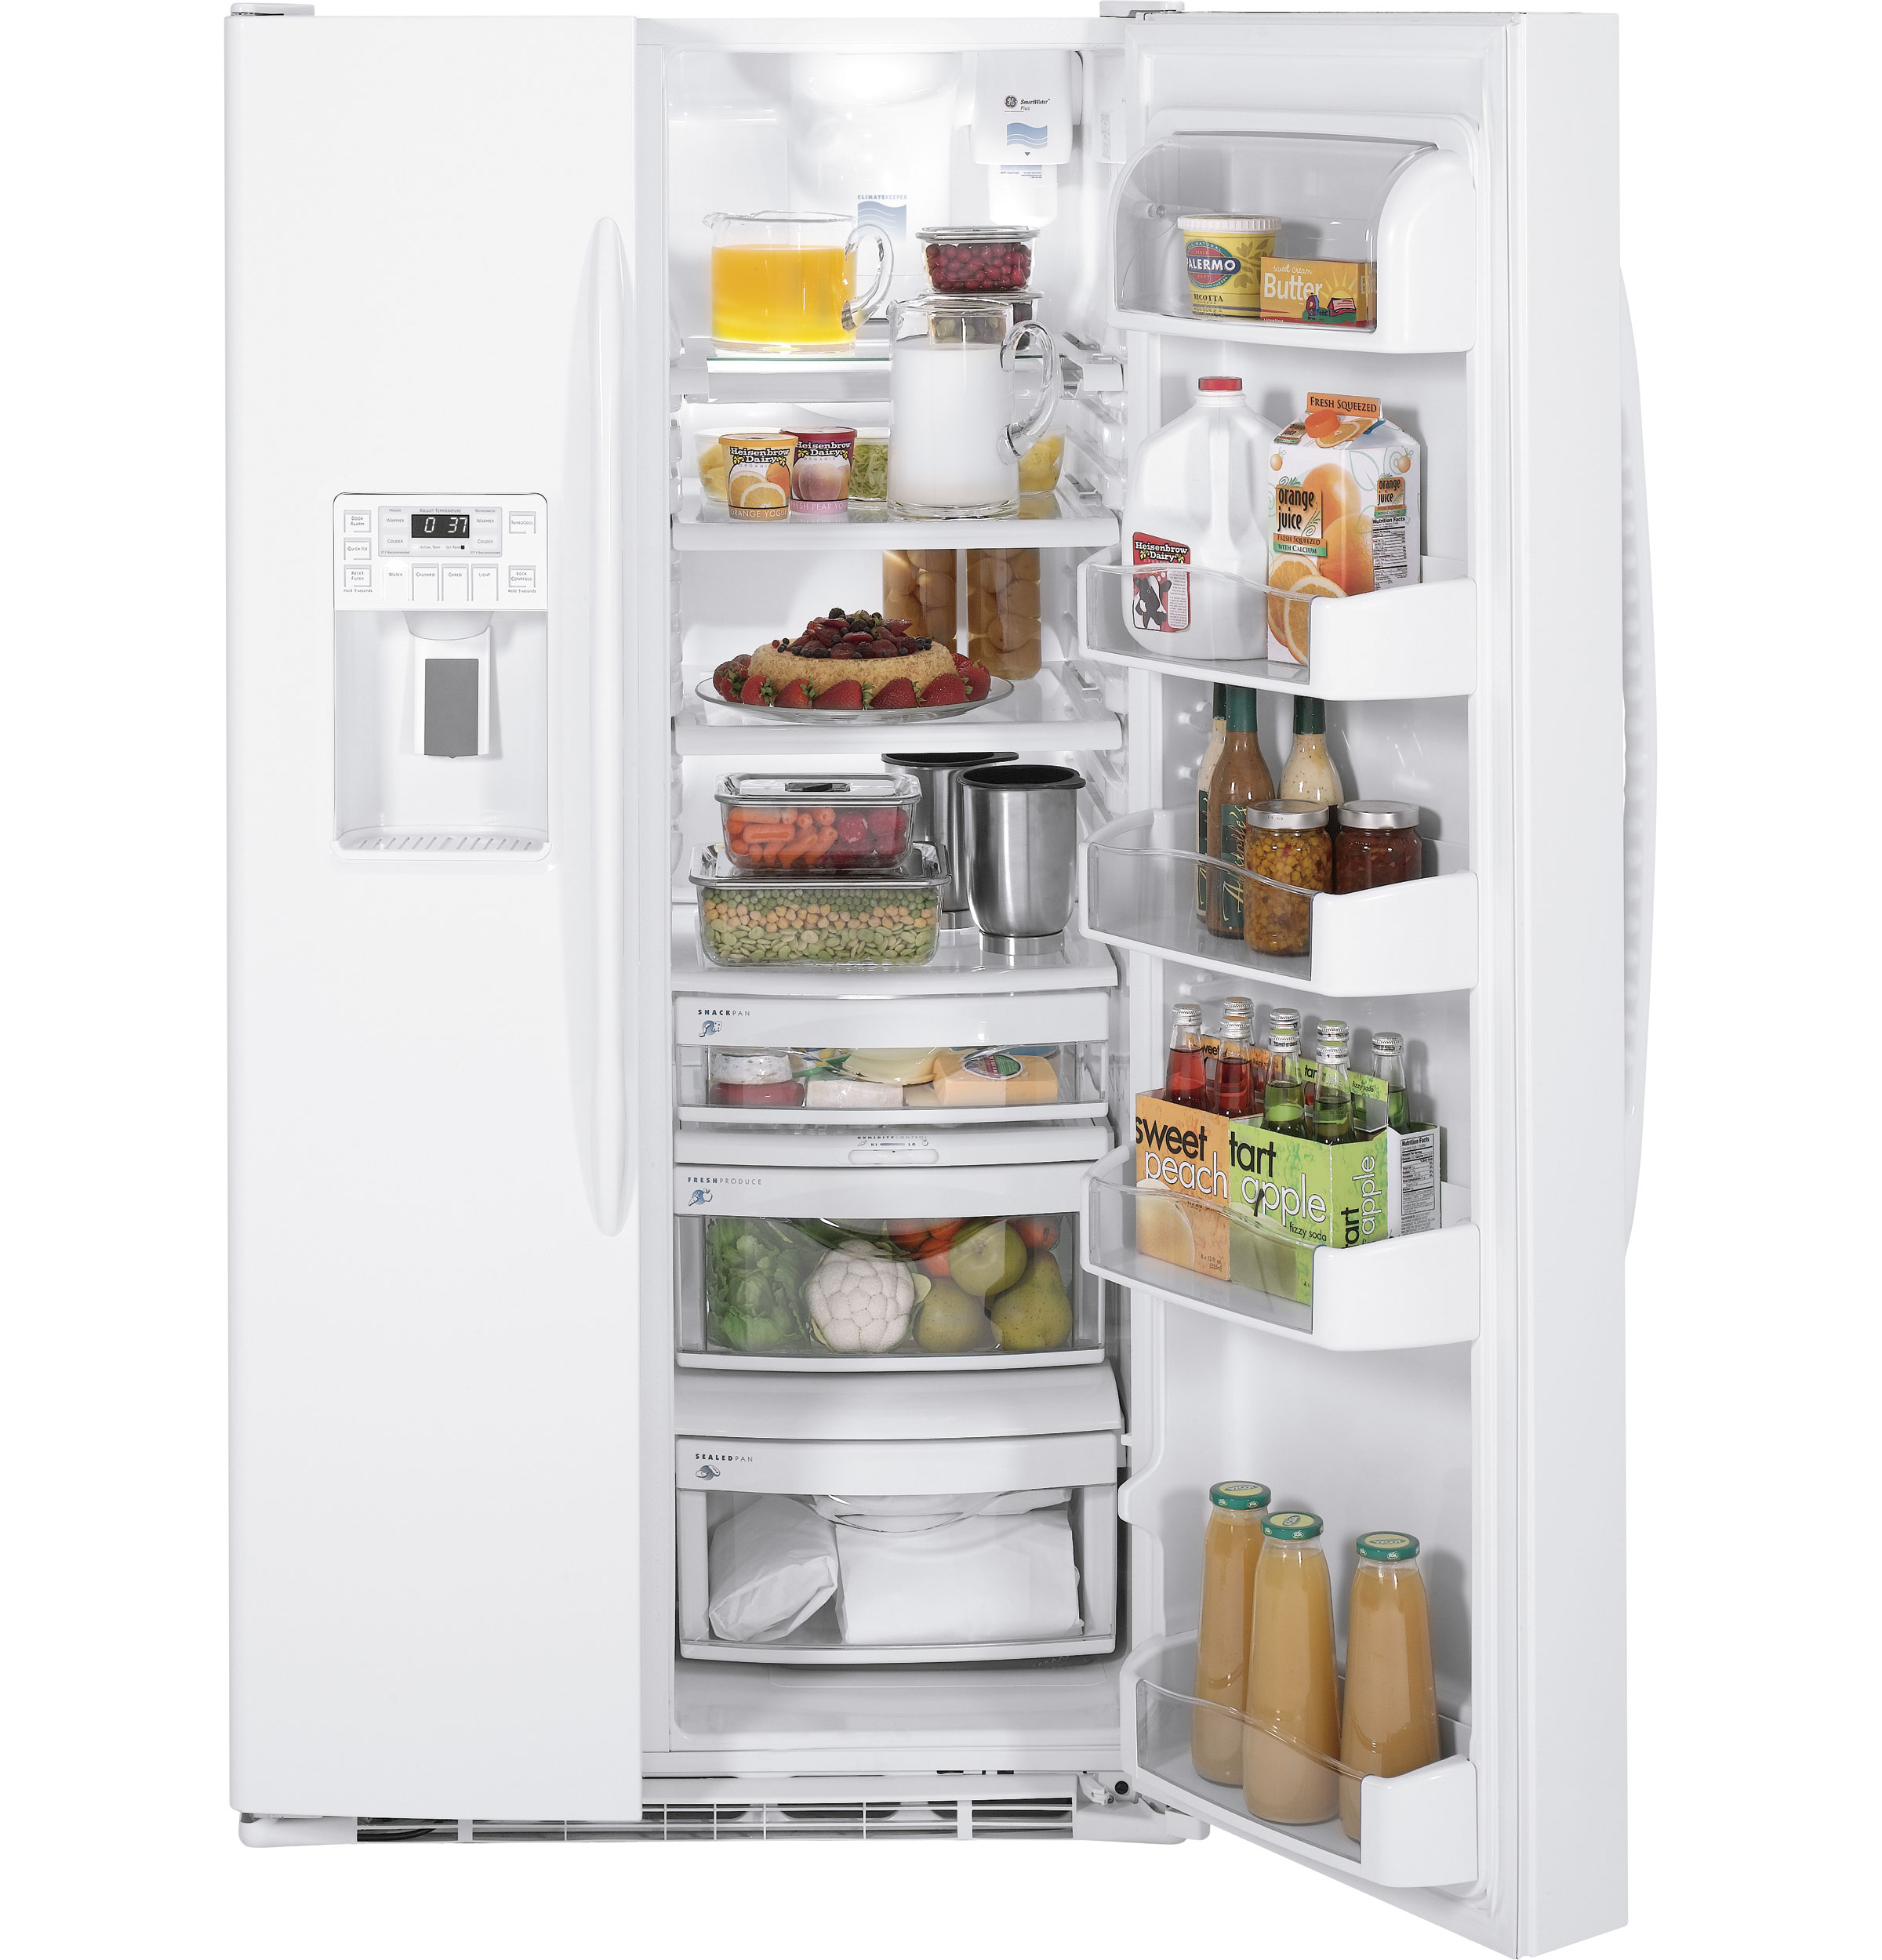 GE Profile™ ENERGY STAR® 29.1 Cu. Ft. Side-by-Side Refrigerator with Dispenser